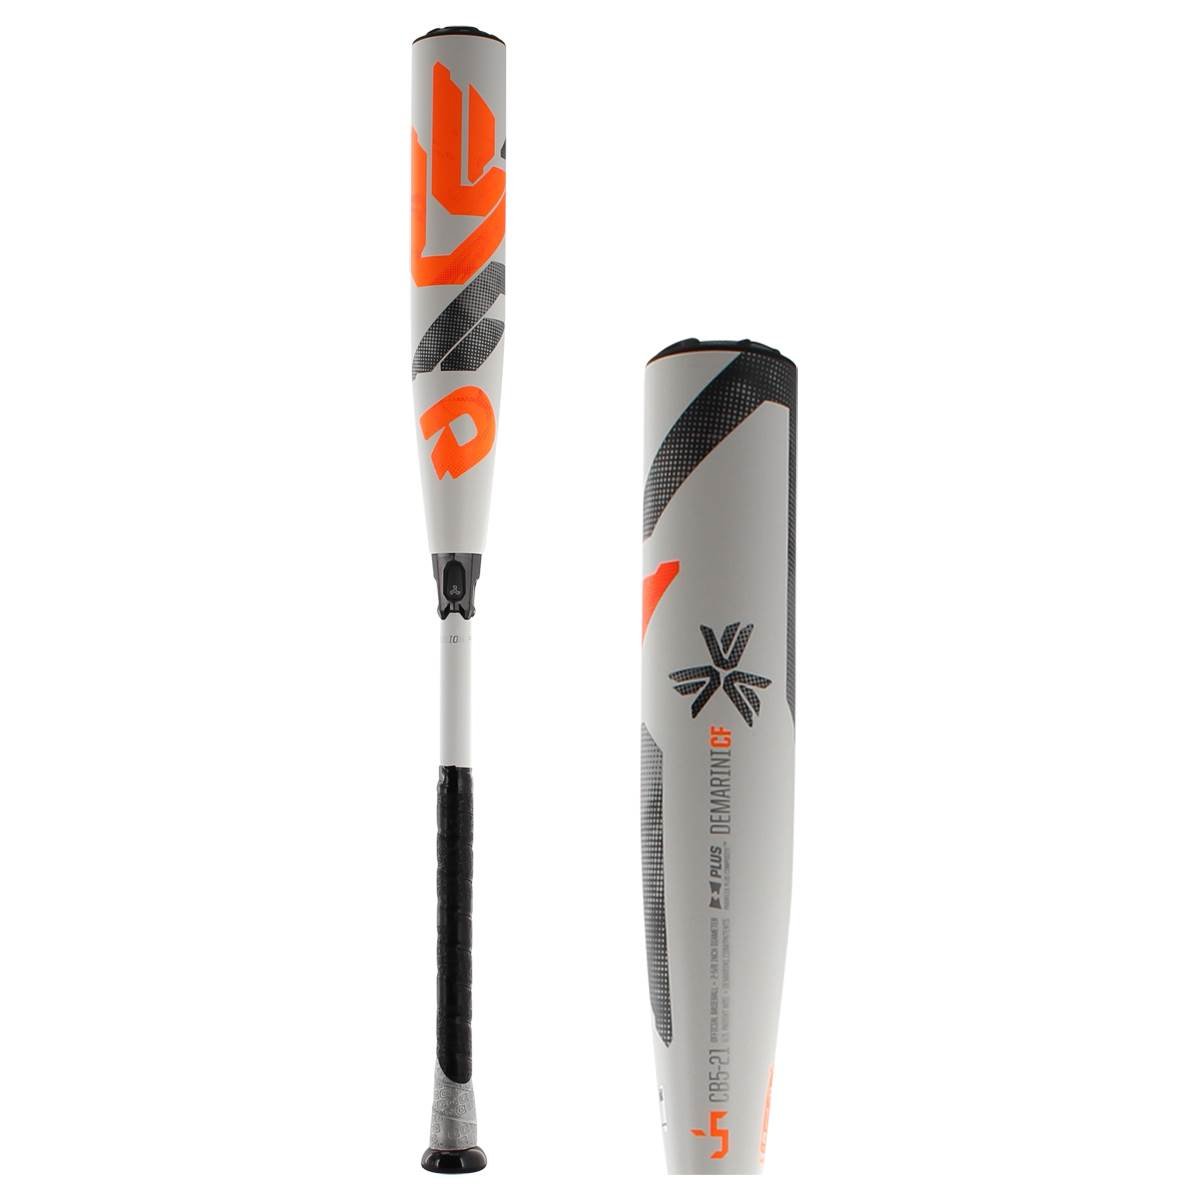 Top 10 Best Drop 5 Bats Ever Reviews & Guide [Top Quality Picks] The